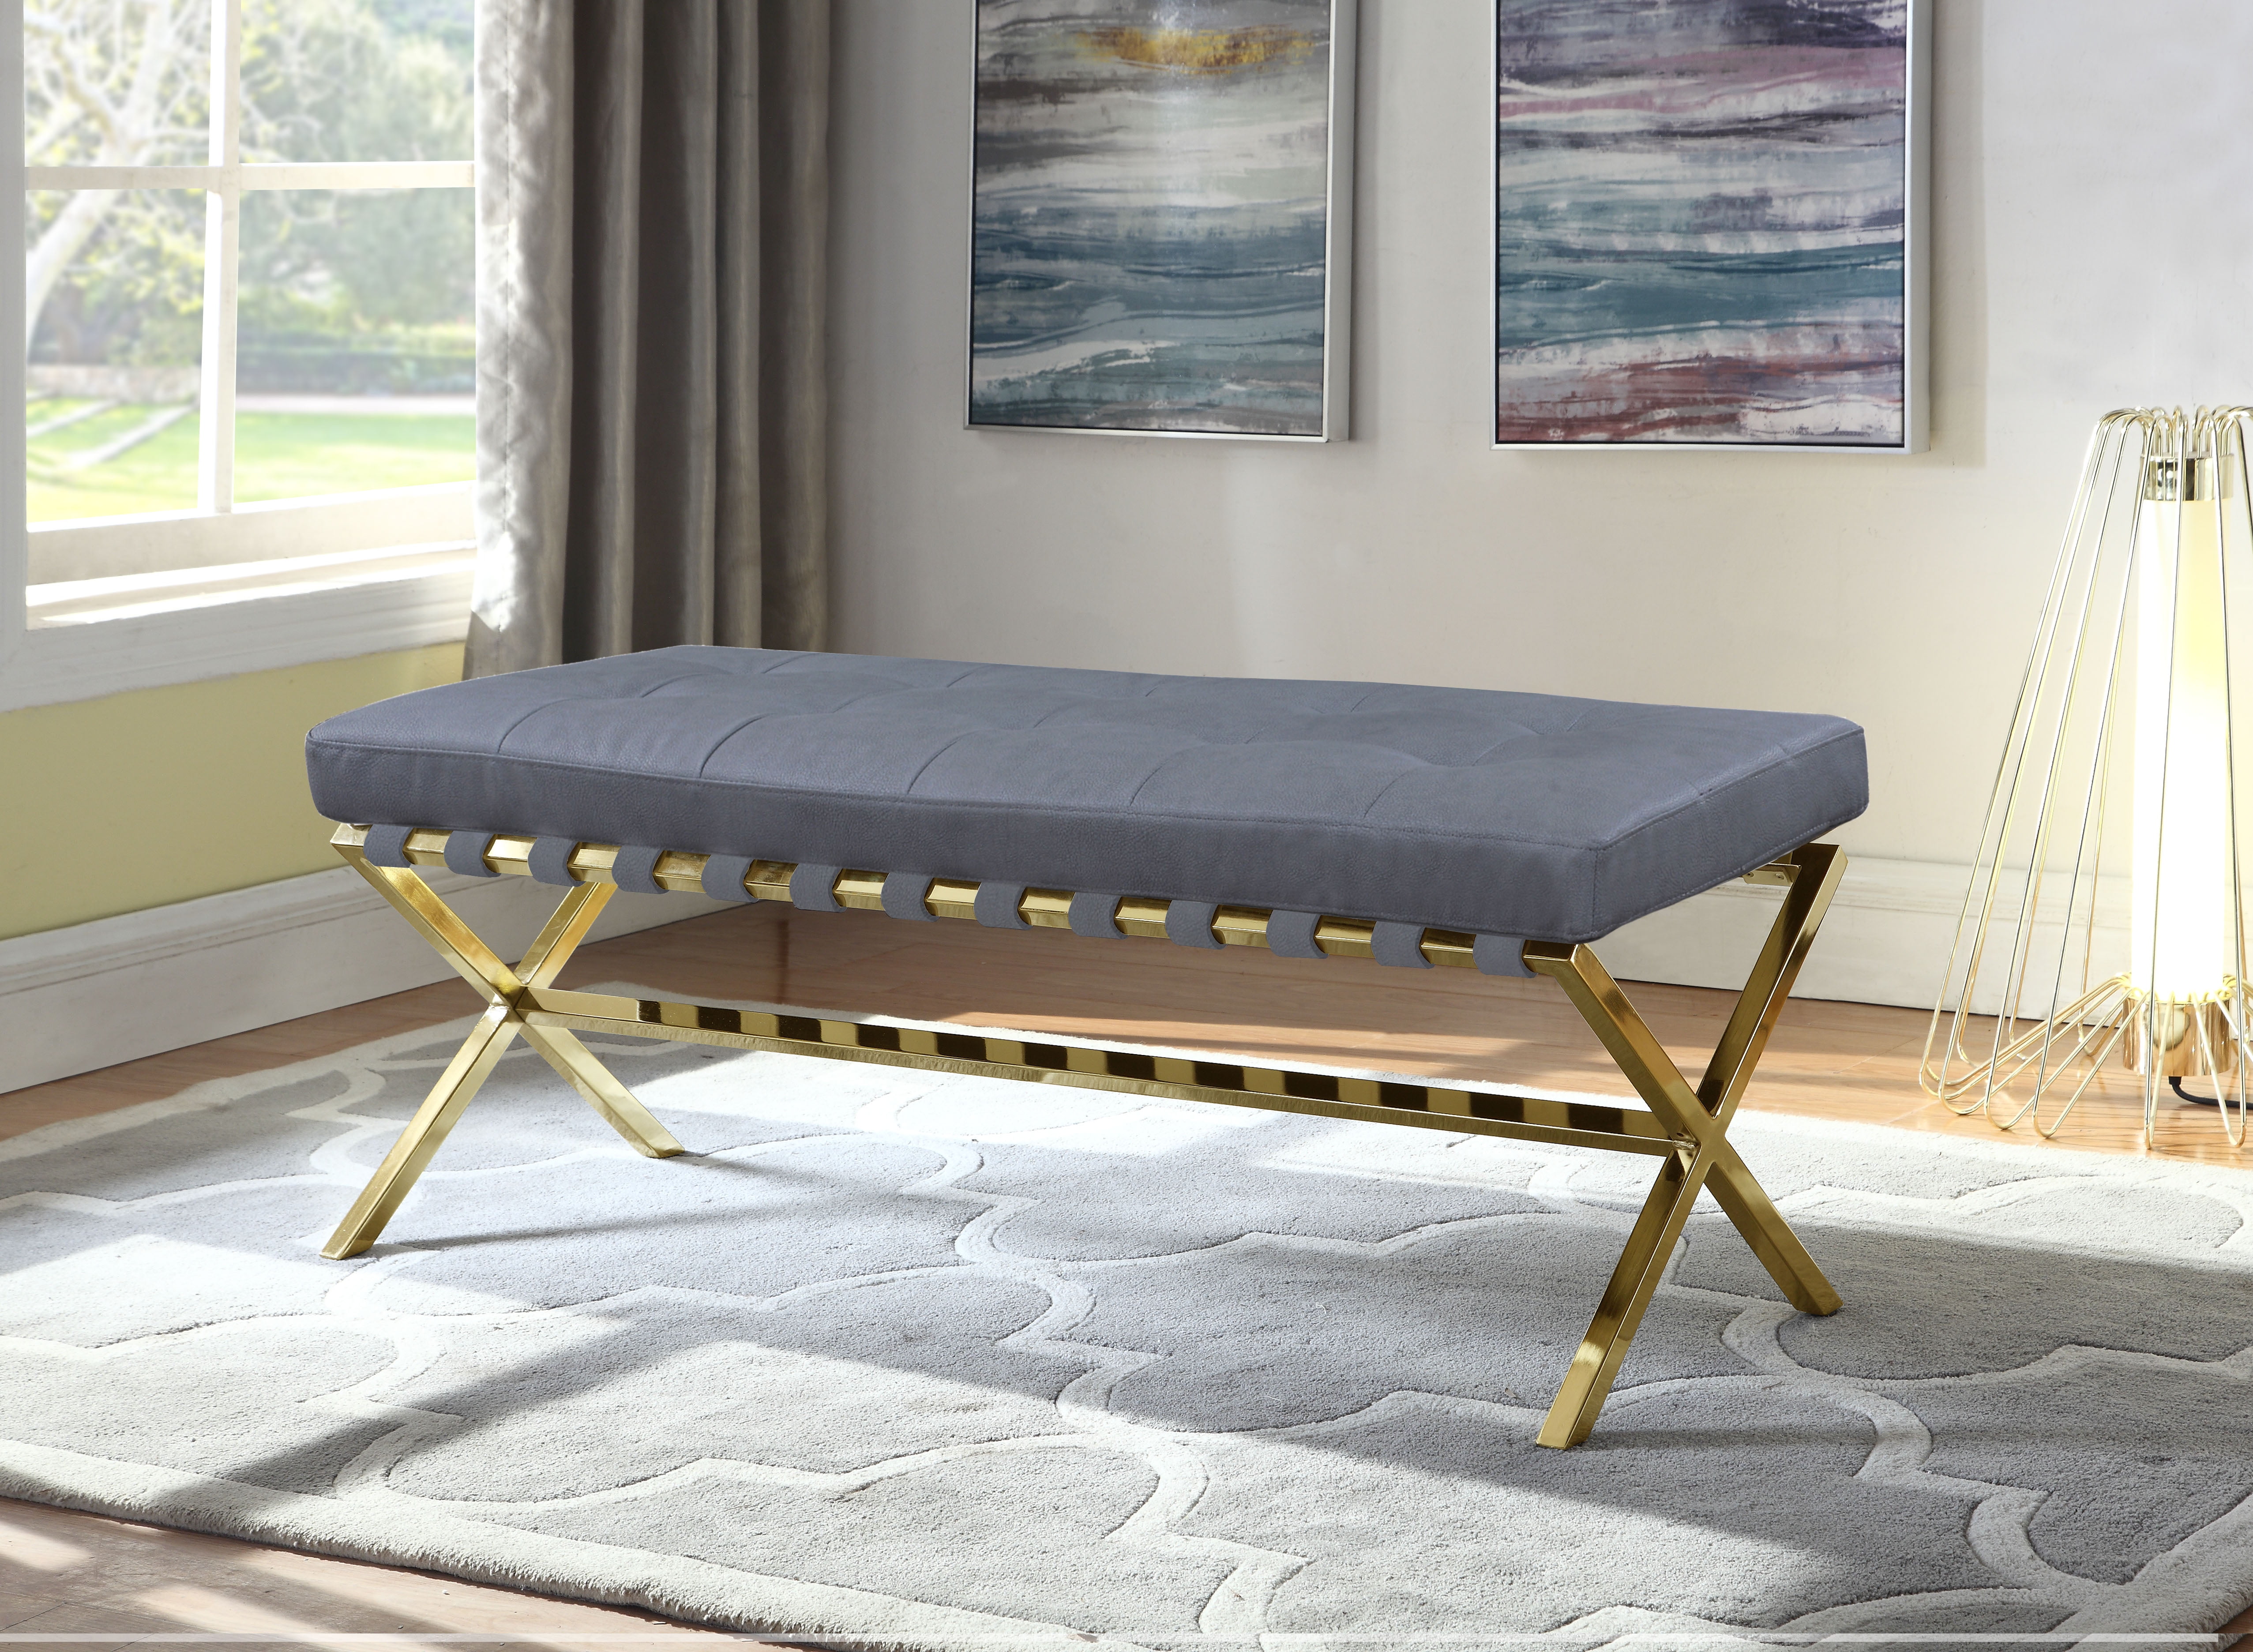 Picture of Luxury Bedding FBH2632 Chic Home Perez PU Leather Modern Contemporary Tufted Seating Goldtone Metal Leg Bench - Grey